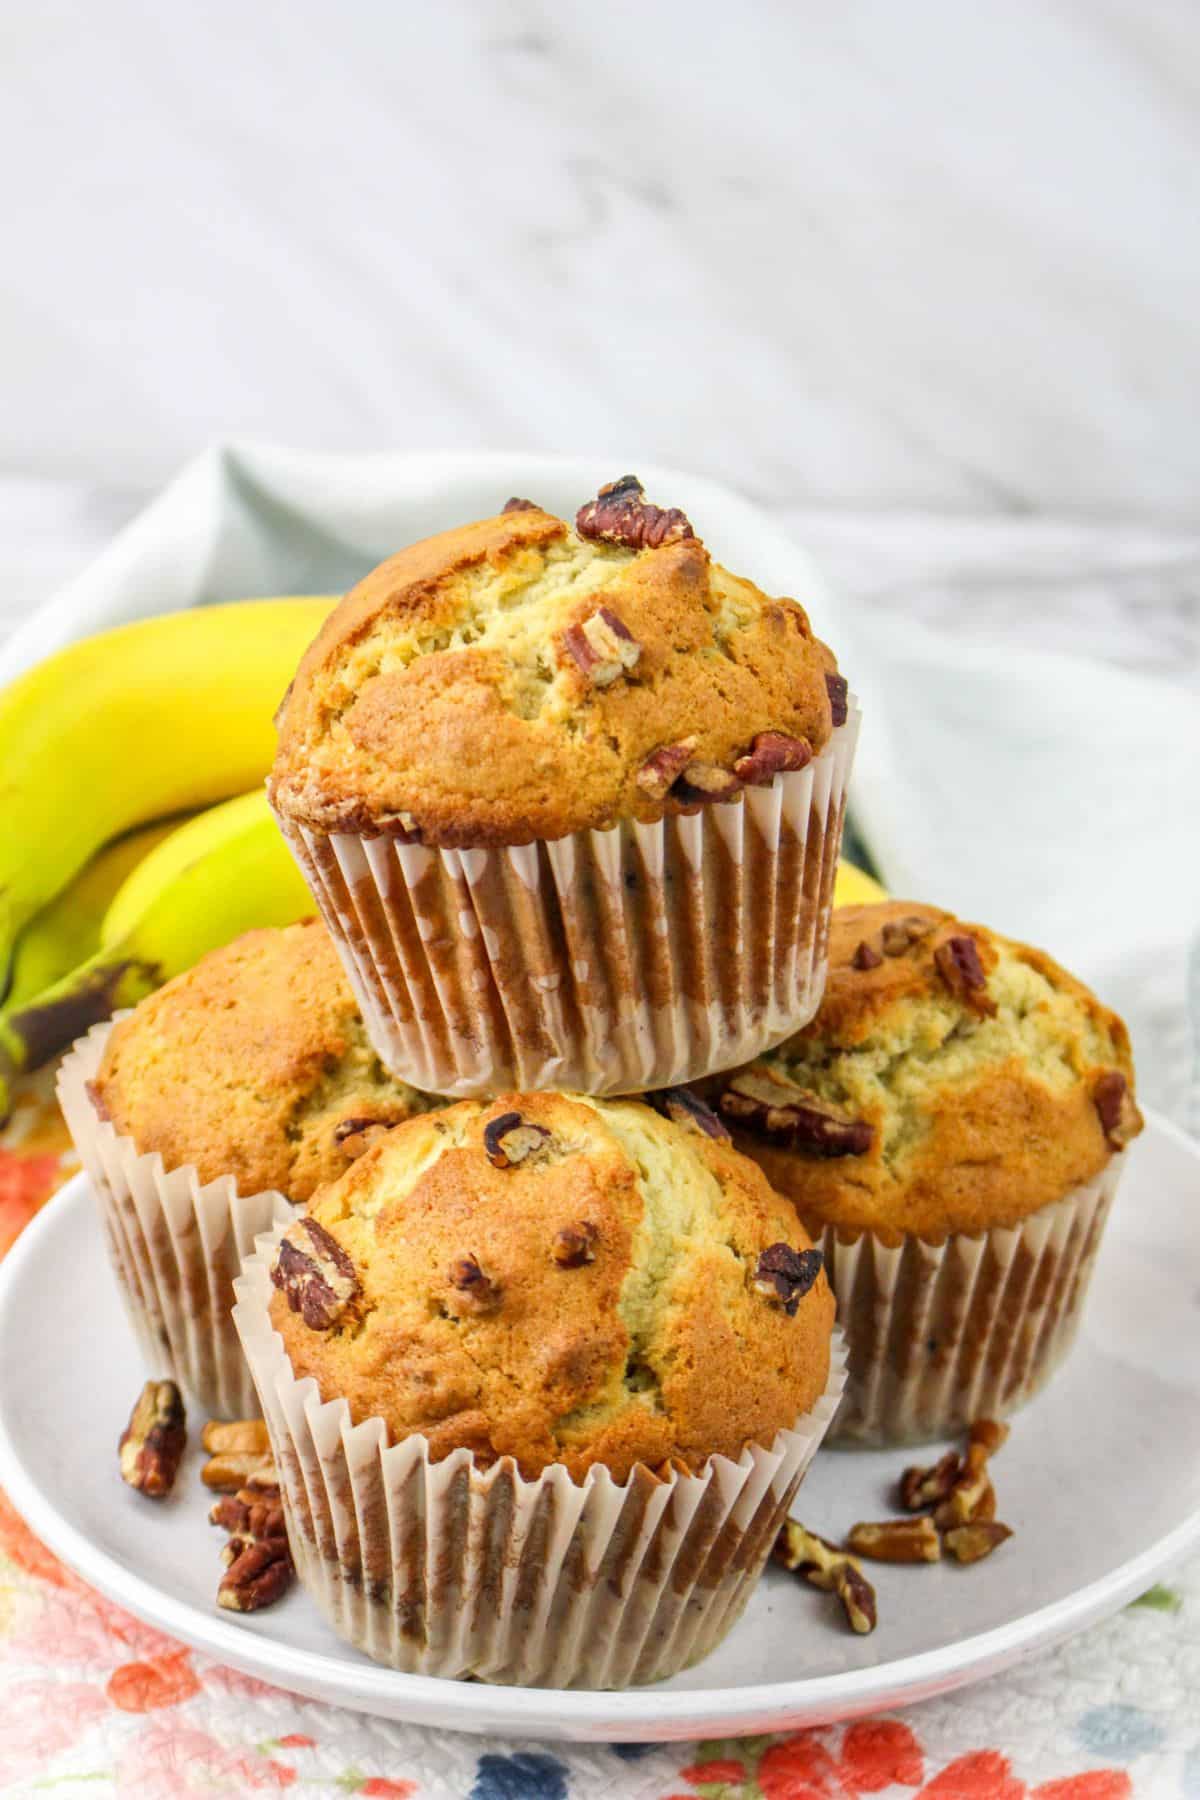 four jumbo banana nut muffins stacked in a pyramid on a plate.